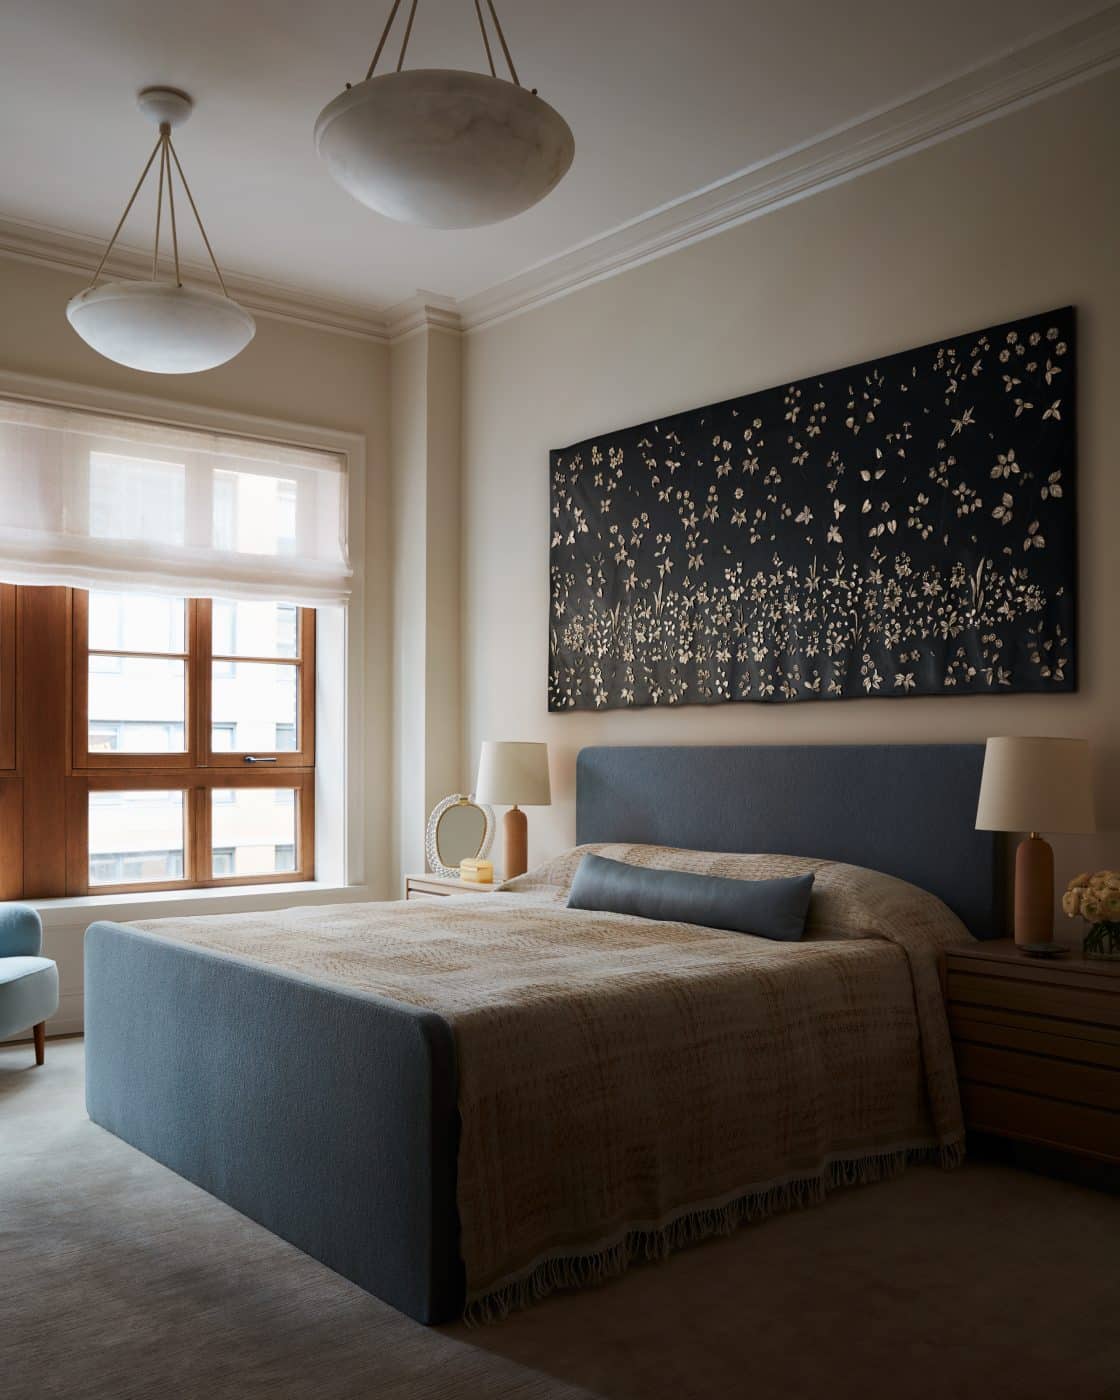 Primary bedroom of apartment in Fitzroy building in New York City by interior designer Shawn Henderson